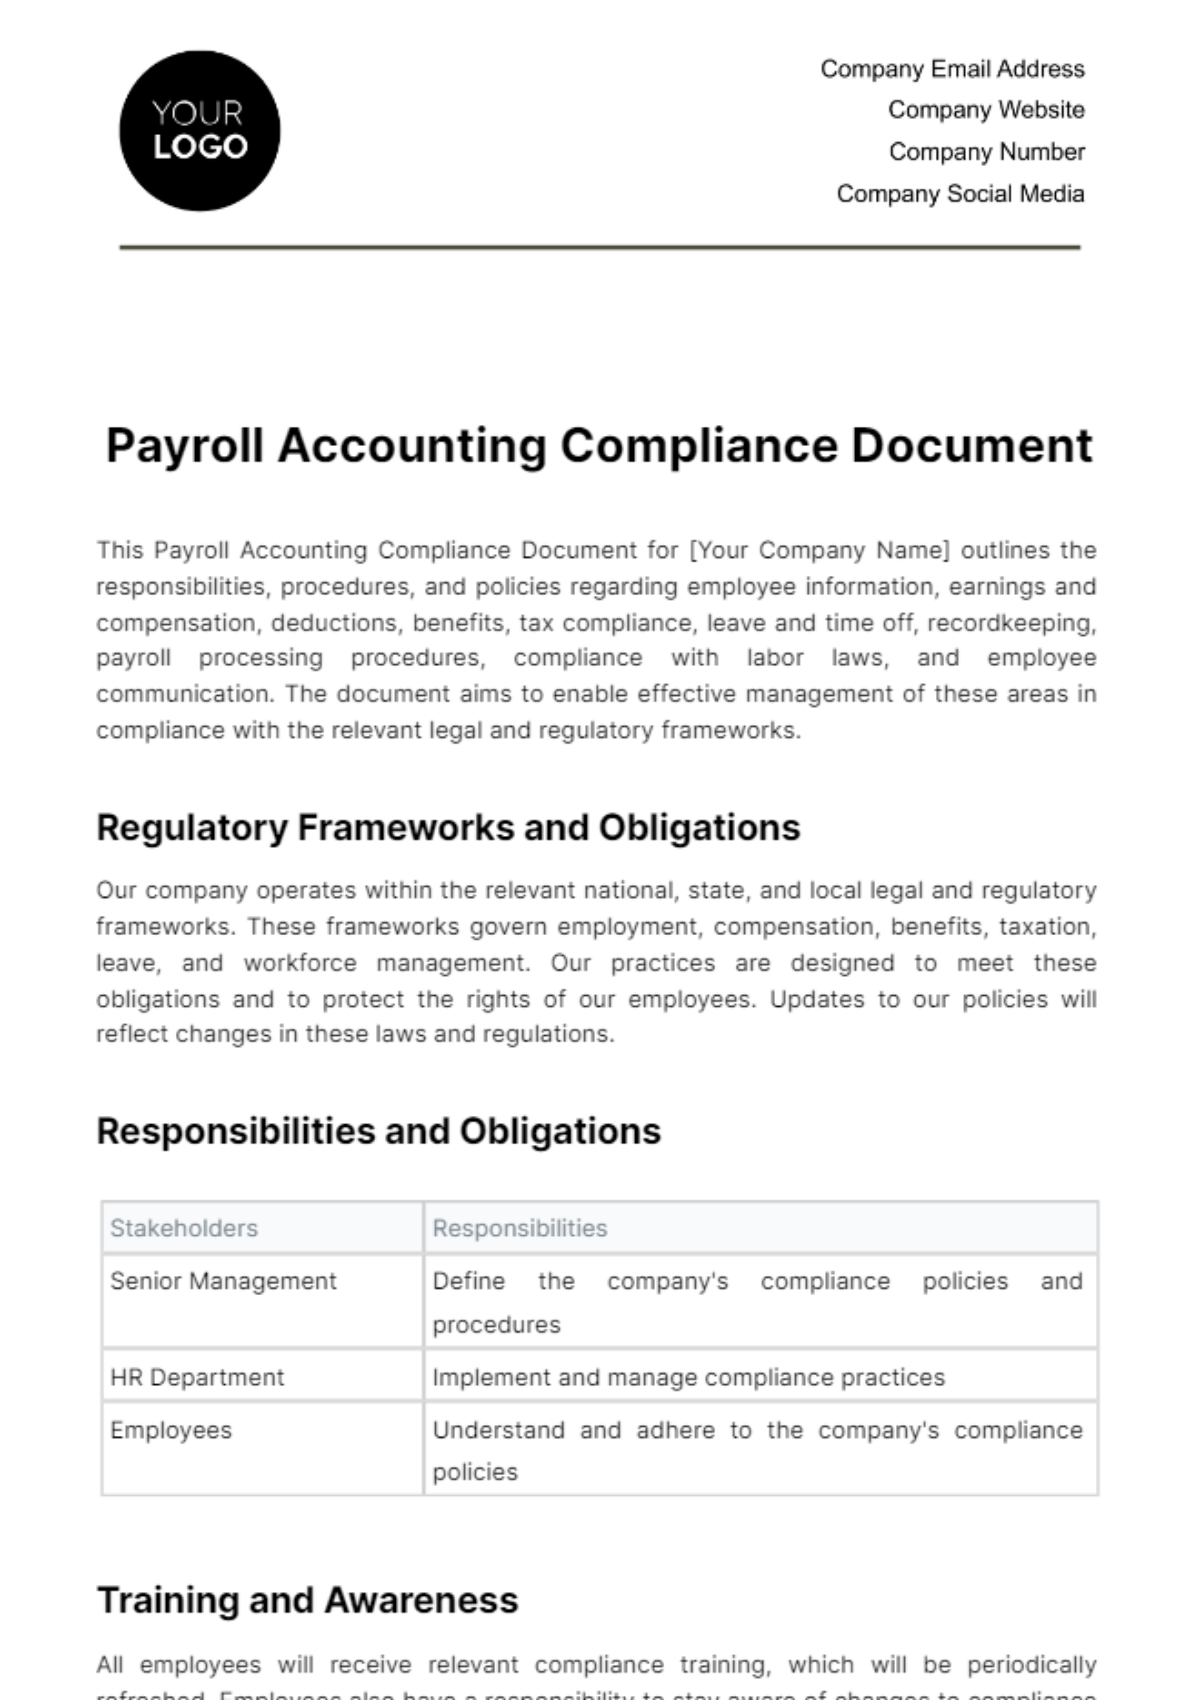 Payroll Accounting Compliance Document Template